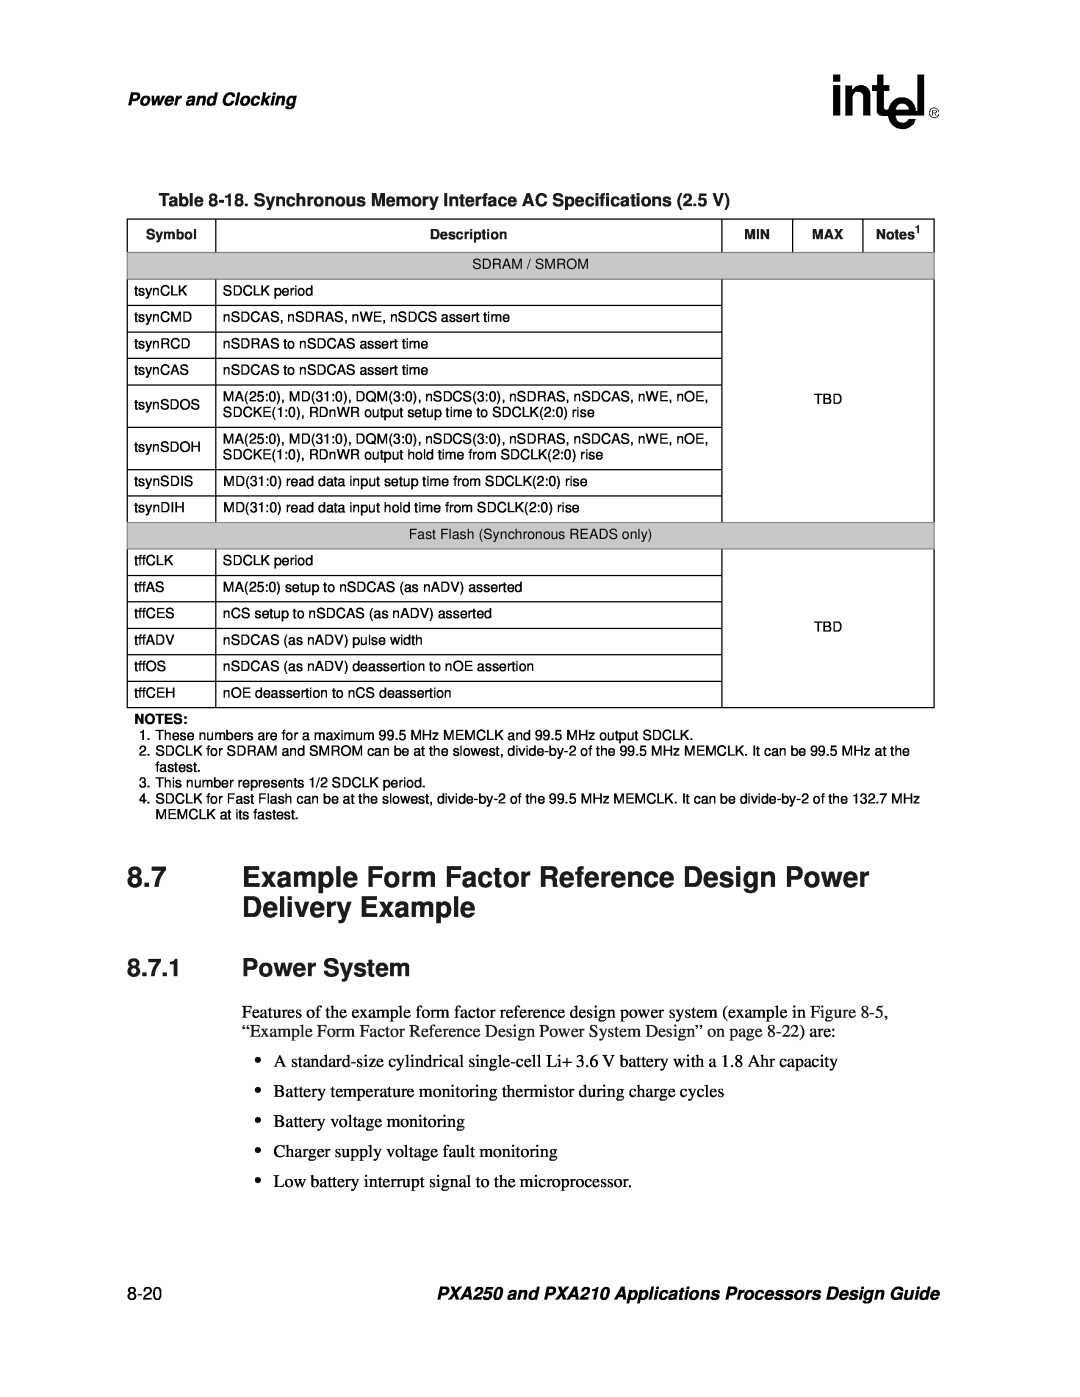 Intel PXA250 and PXA210 Example Form Factor Reference Design Power Delivery Example, Power System, Power and Clocking 